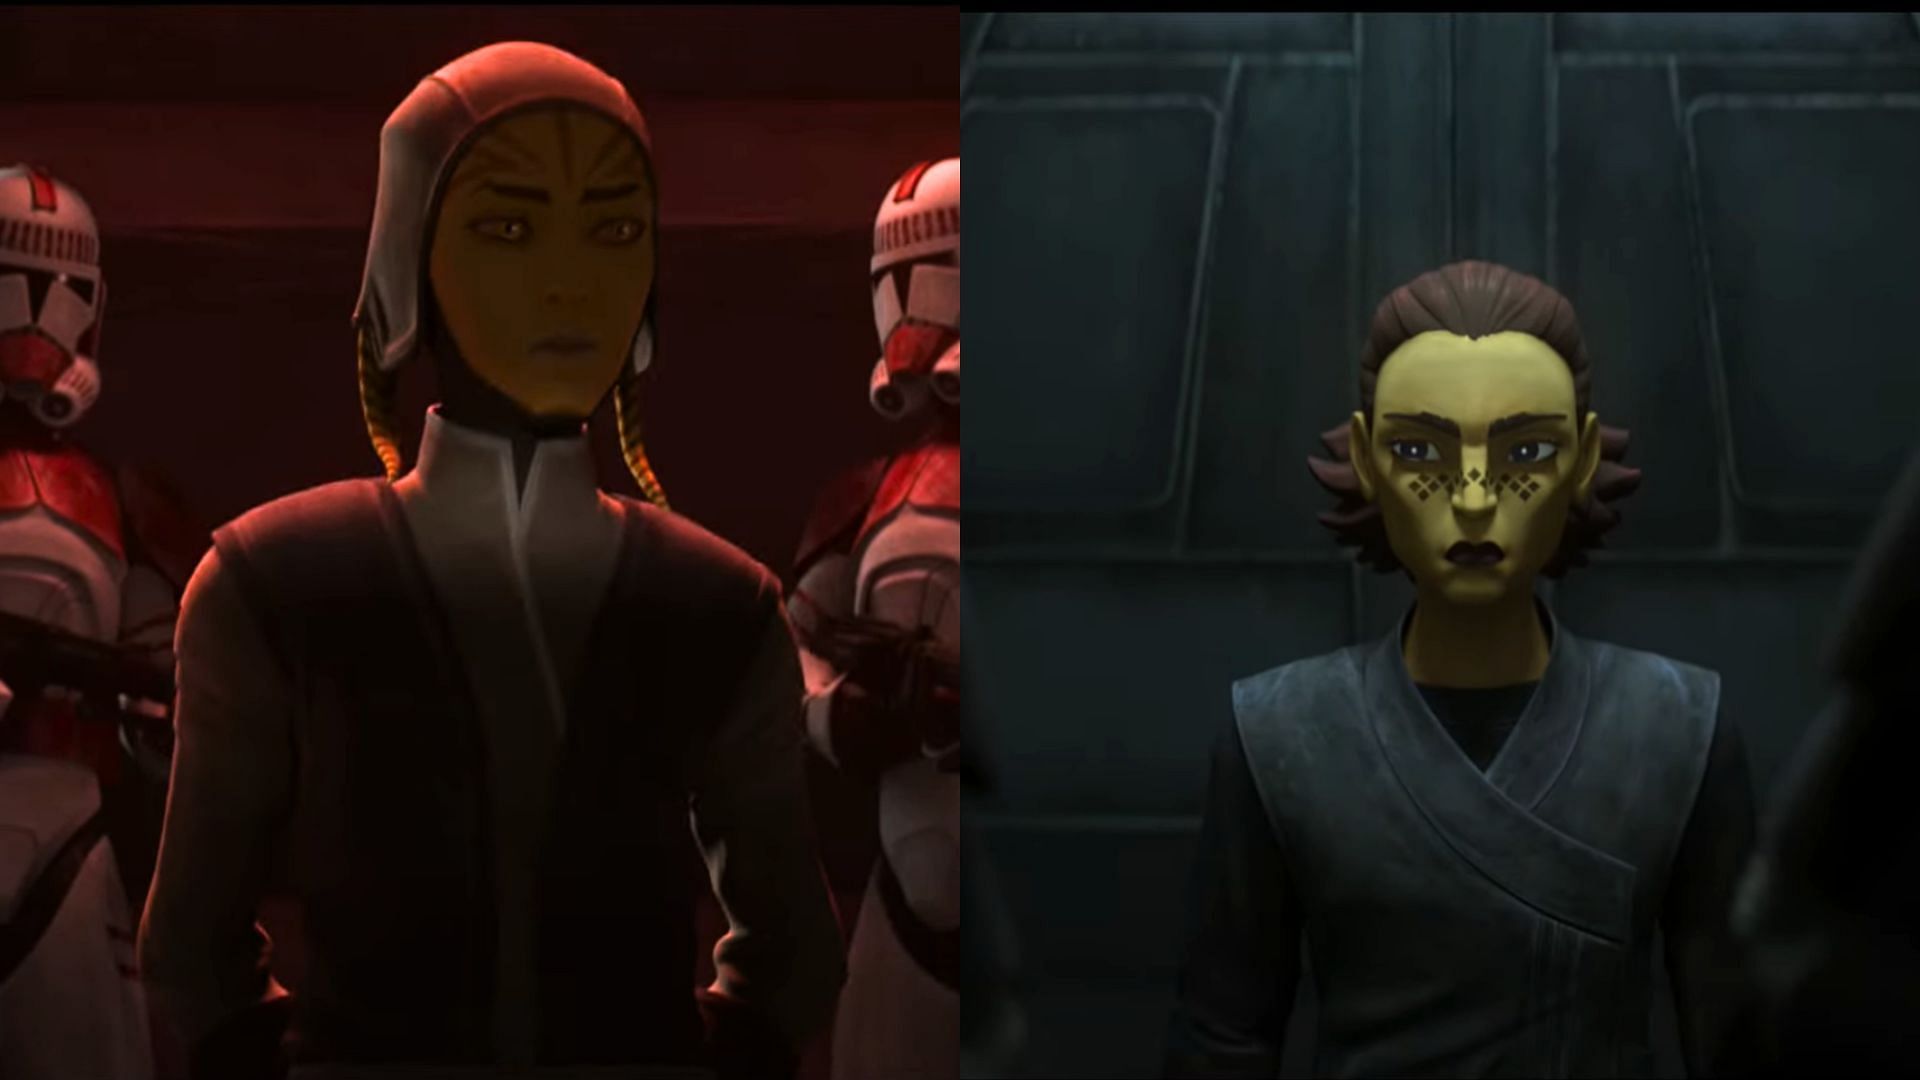 Fourth Sister releases Barriss to become an Inquisitor (Image via Disney+)